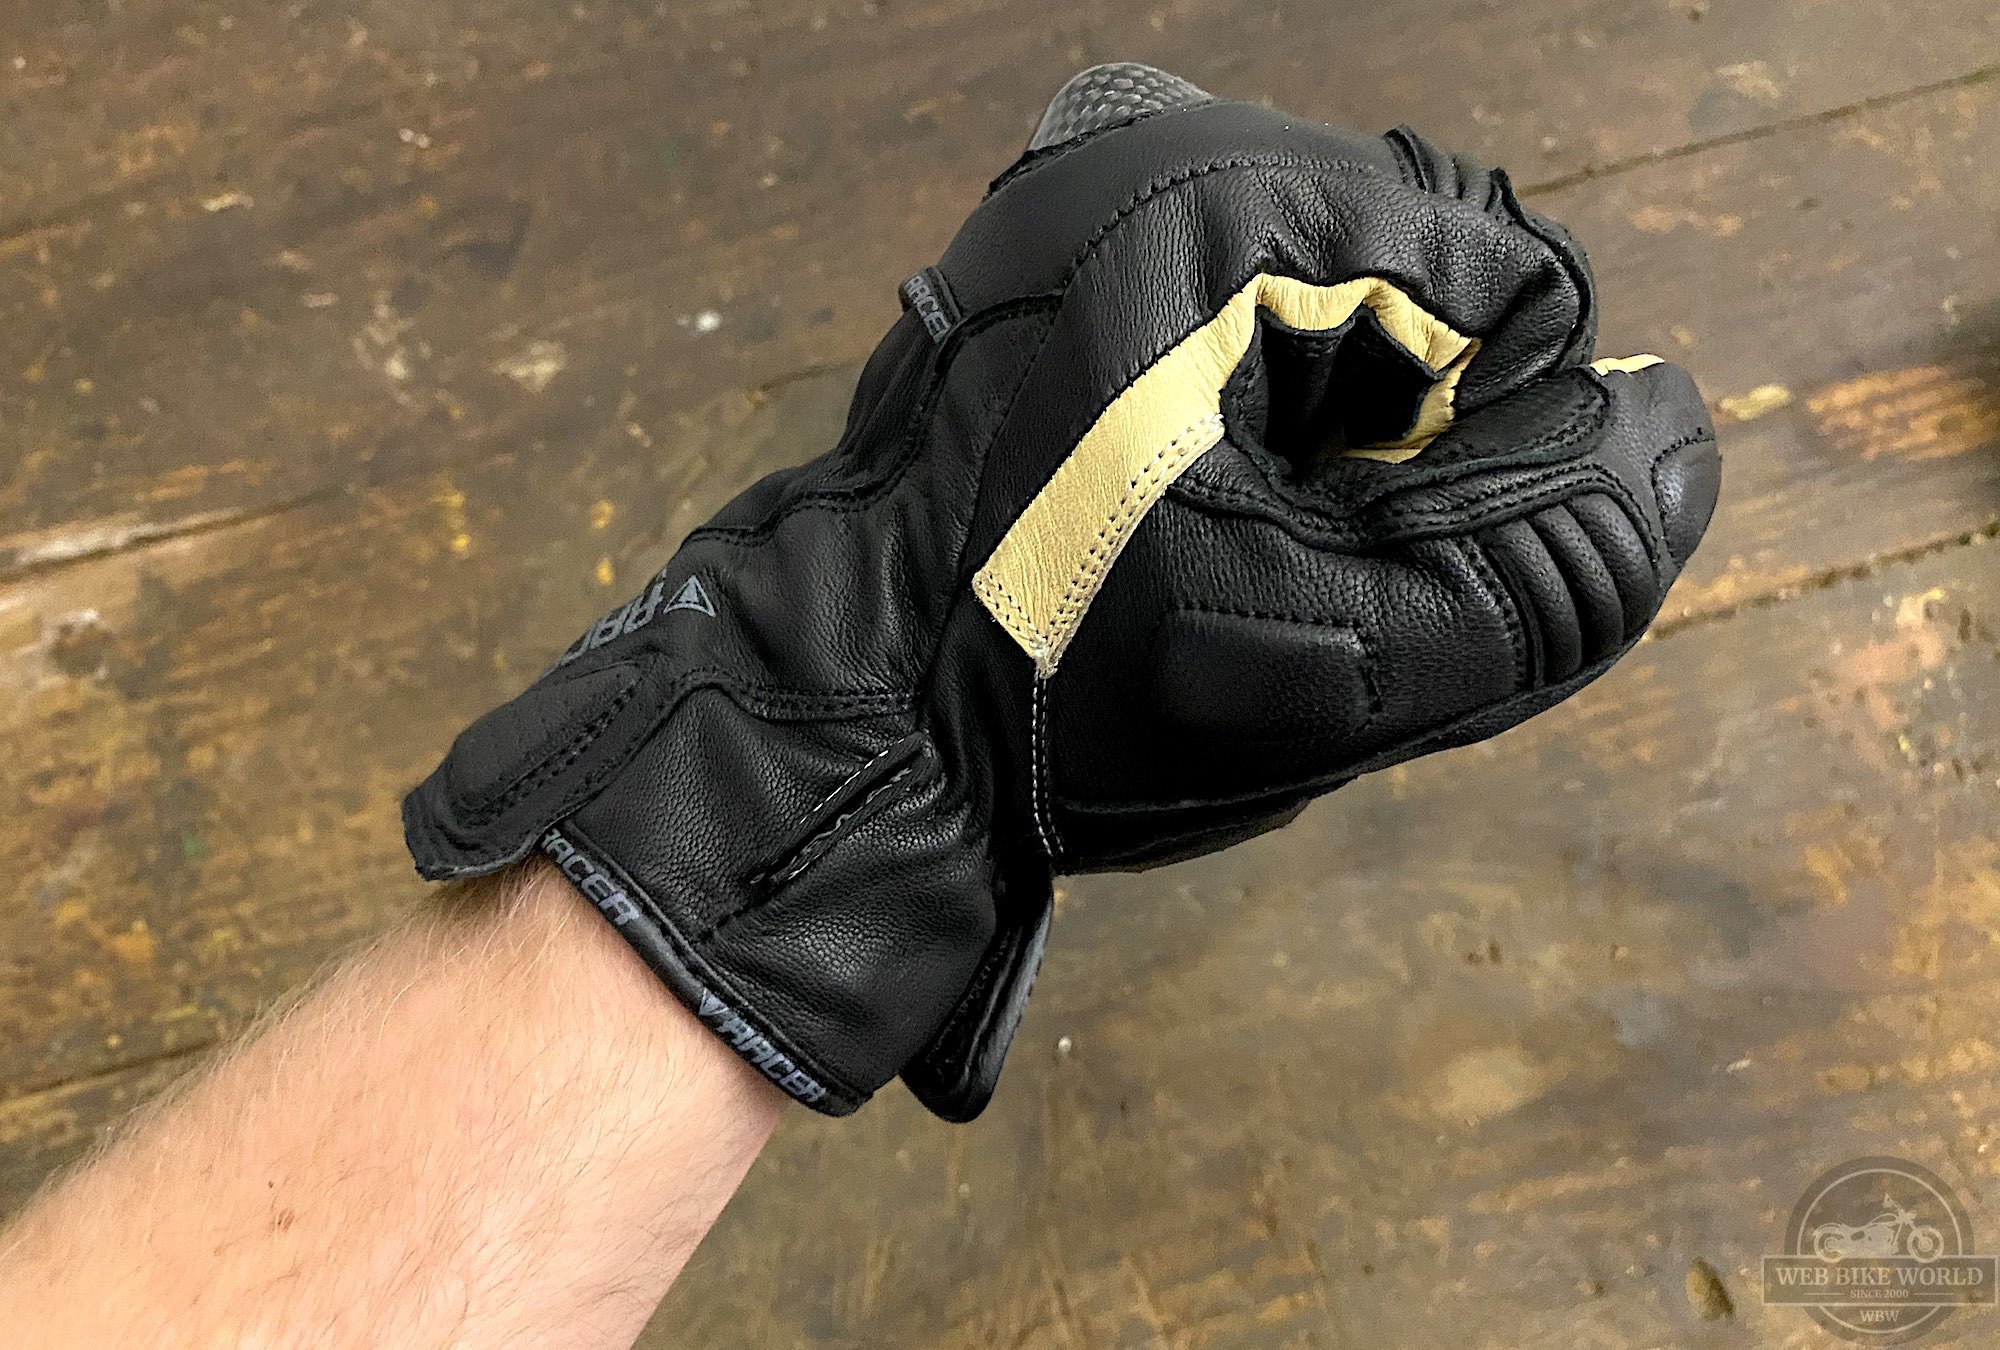 A closed fist while wearing the MultiTop Short gloves showing off the yellow kangaroo palm leather